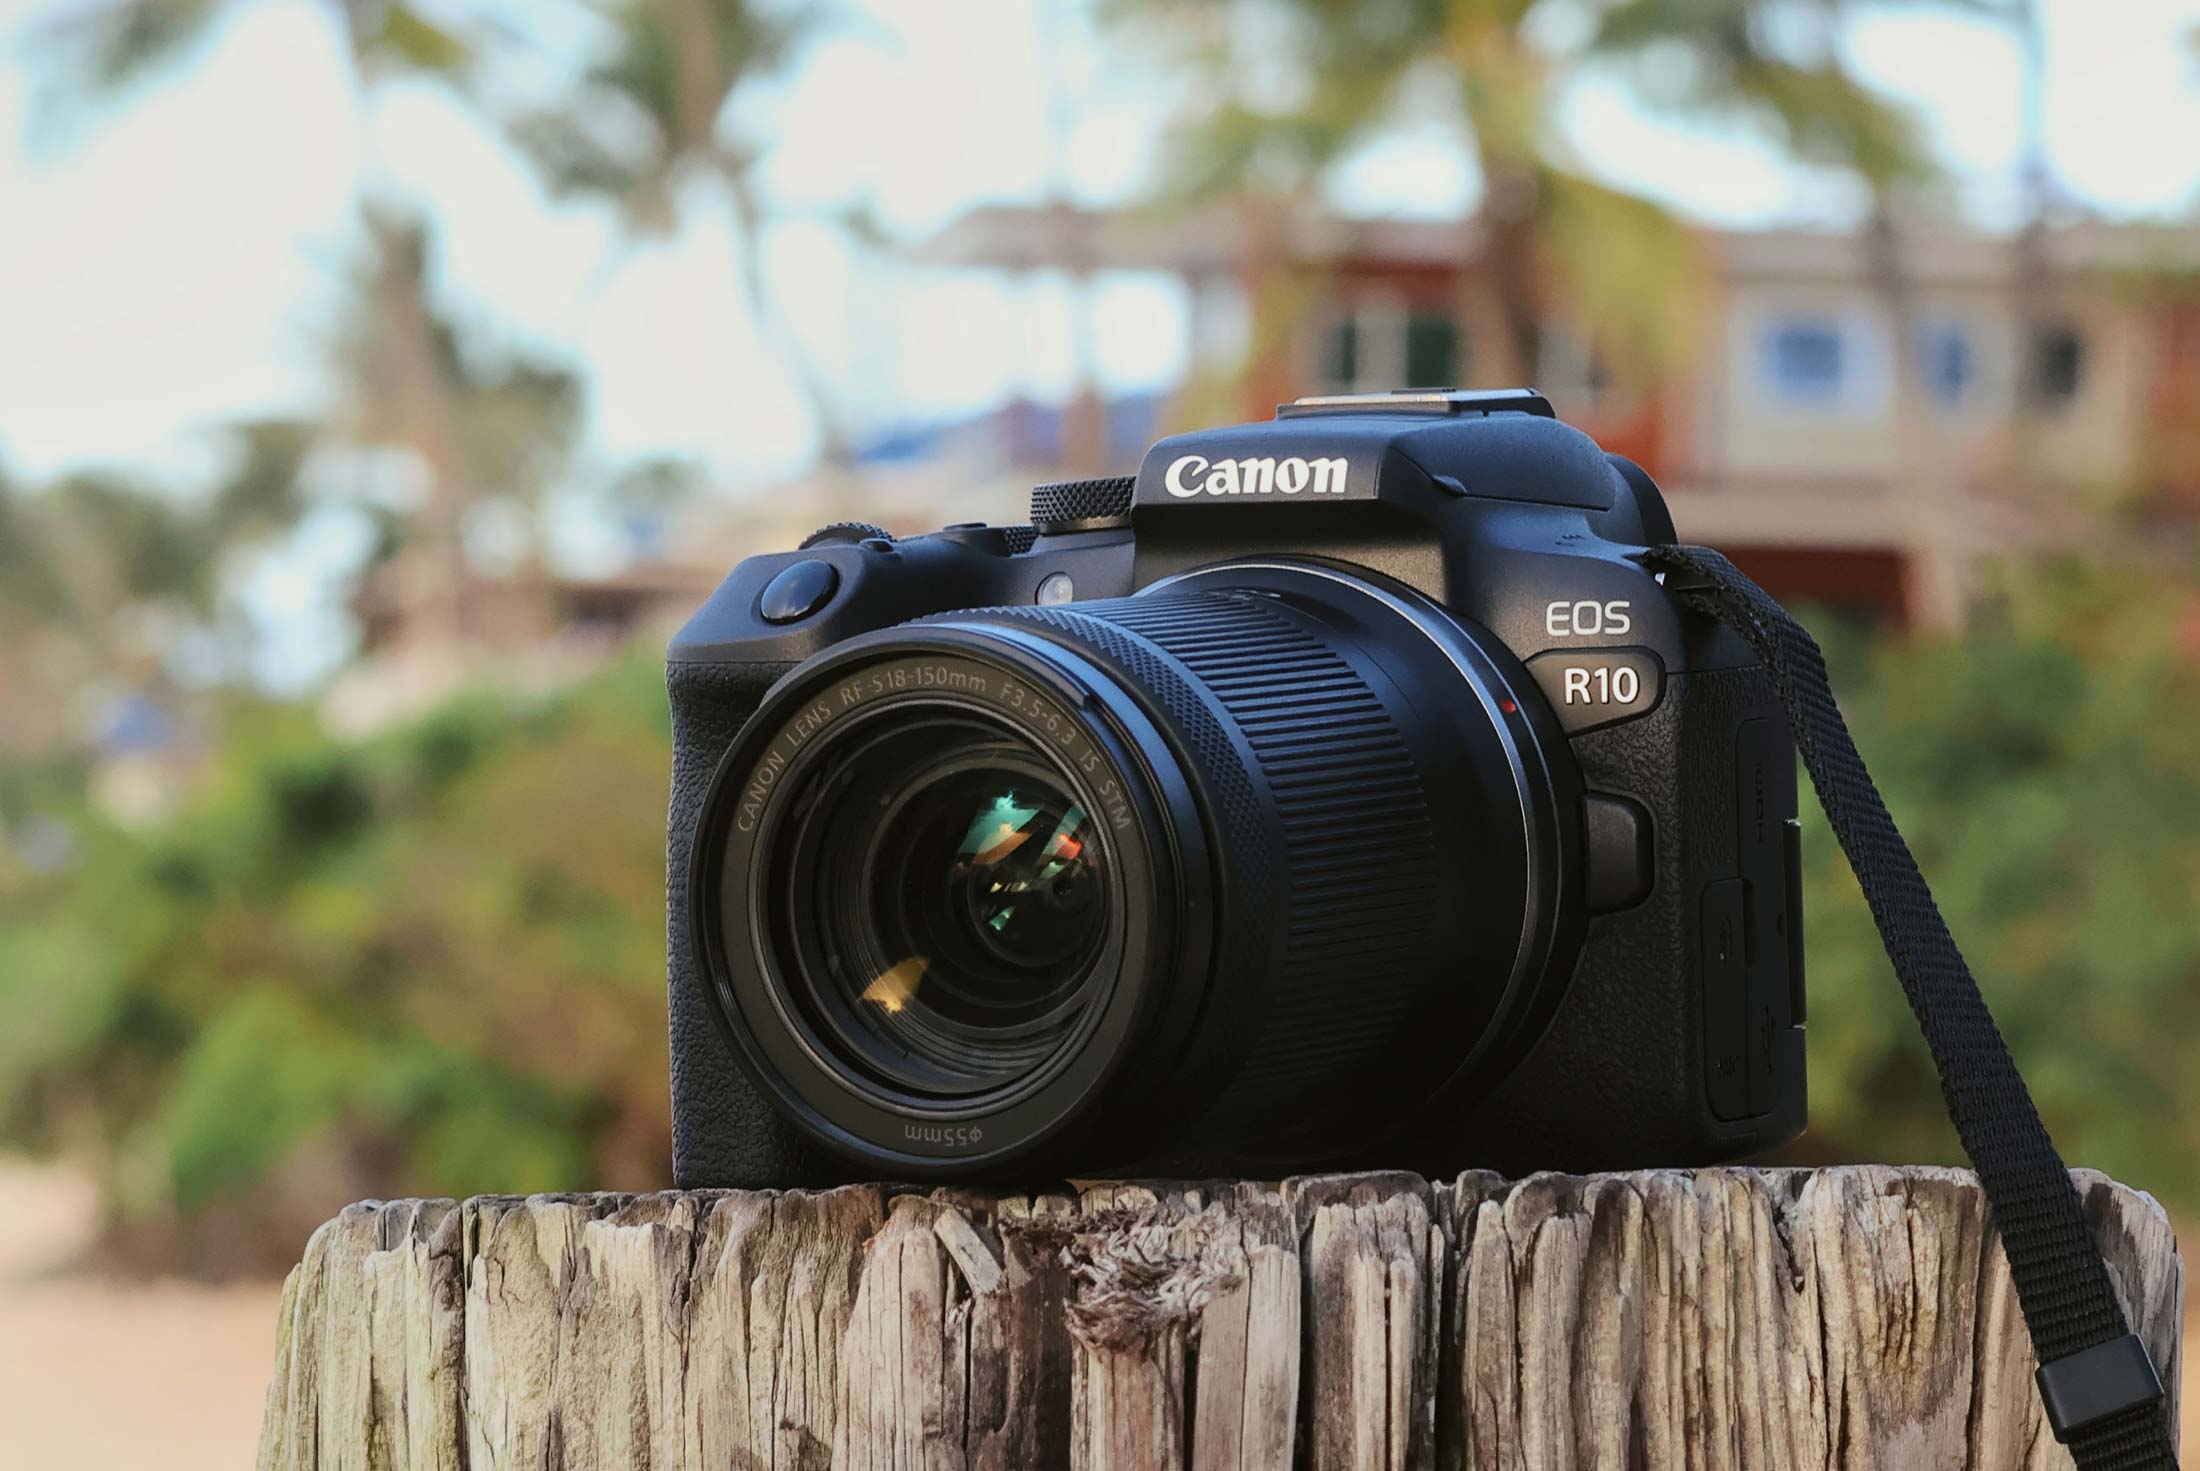 Canon EOS R10 Review: What You Need To Know About This APS-C